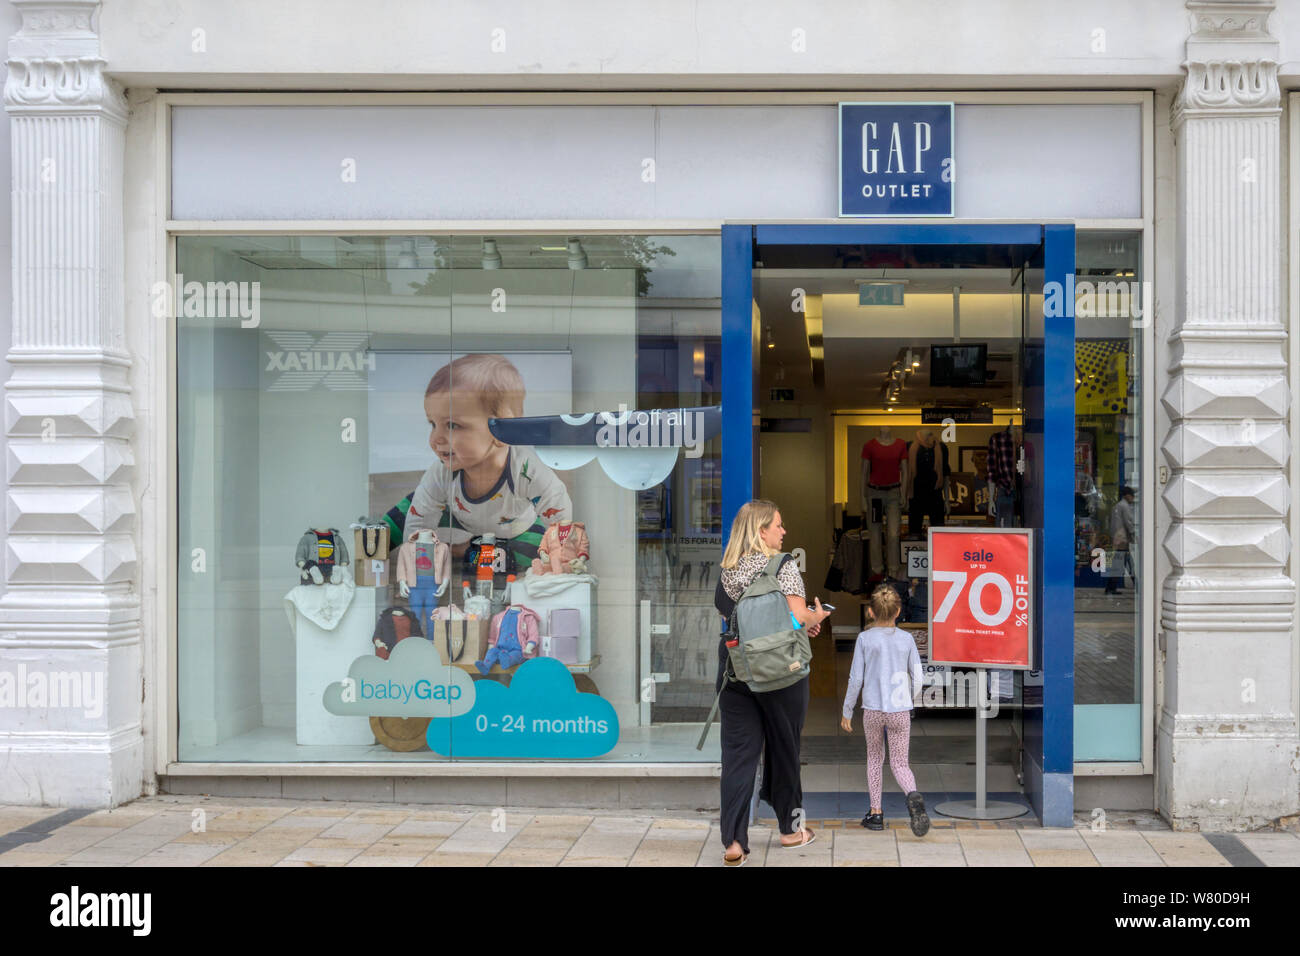 Possibly a mother & daughter visit a Gap outlet shop in Bromley High Street, South London. Stock Photo